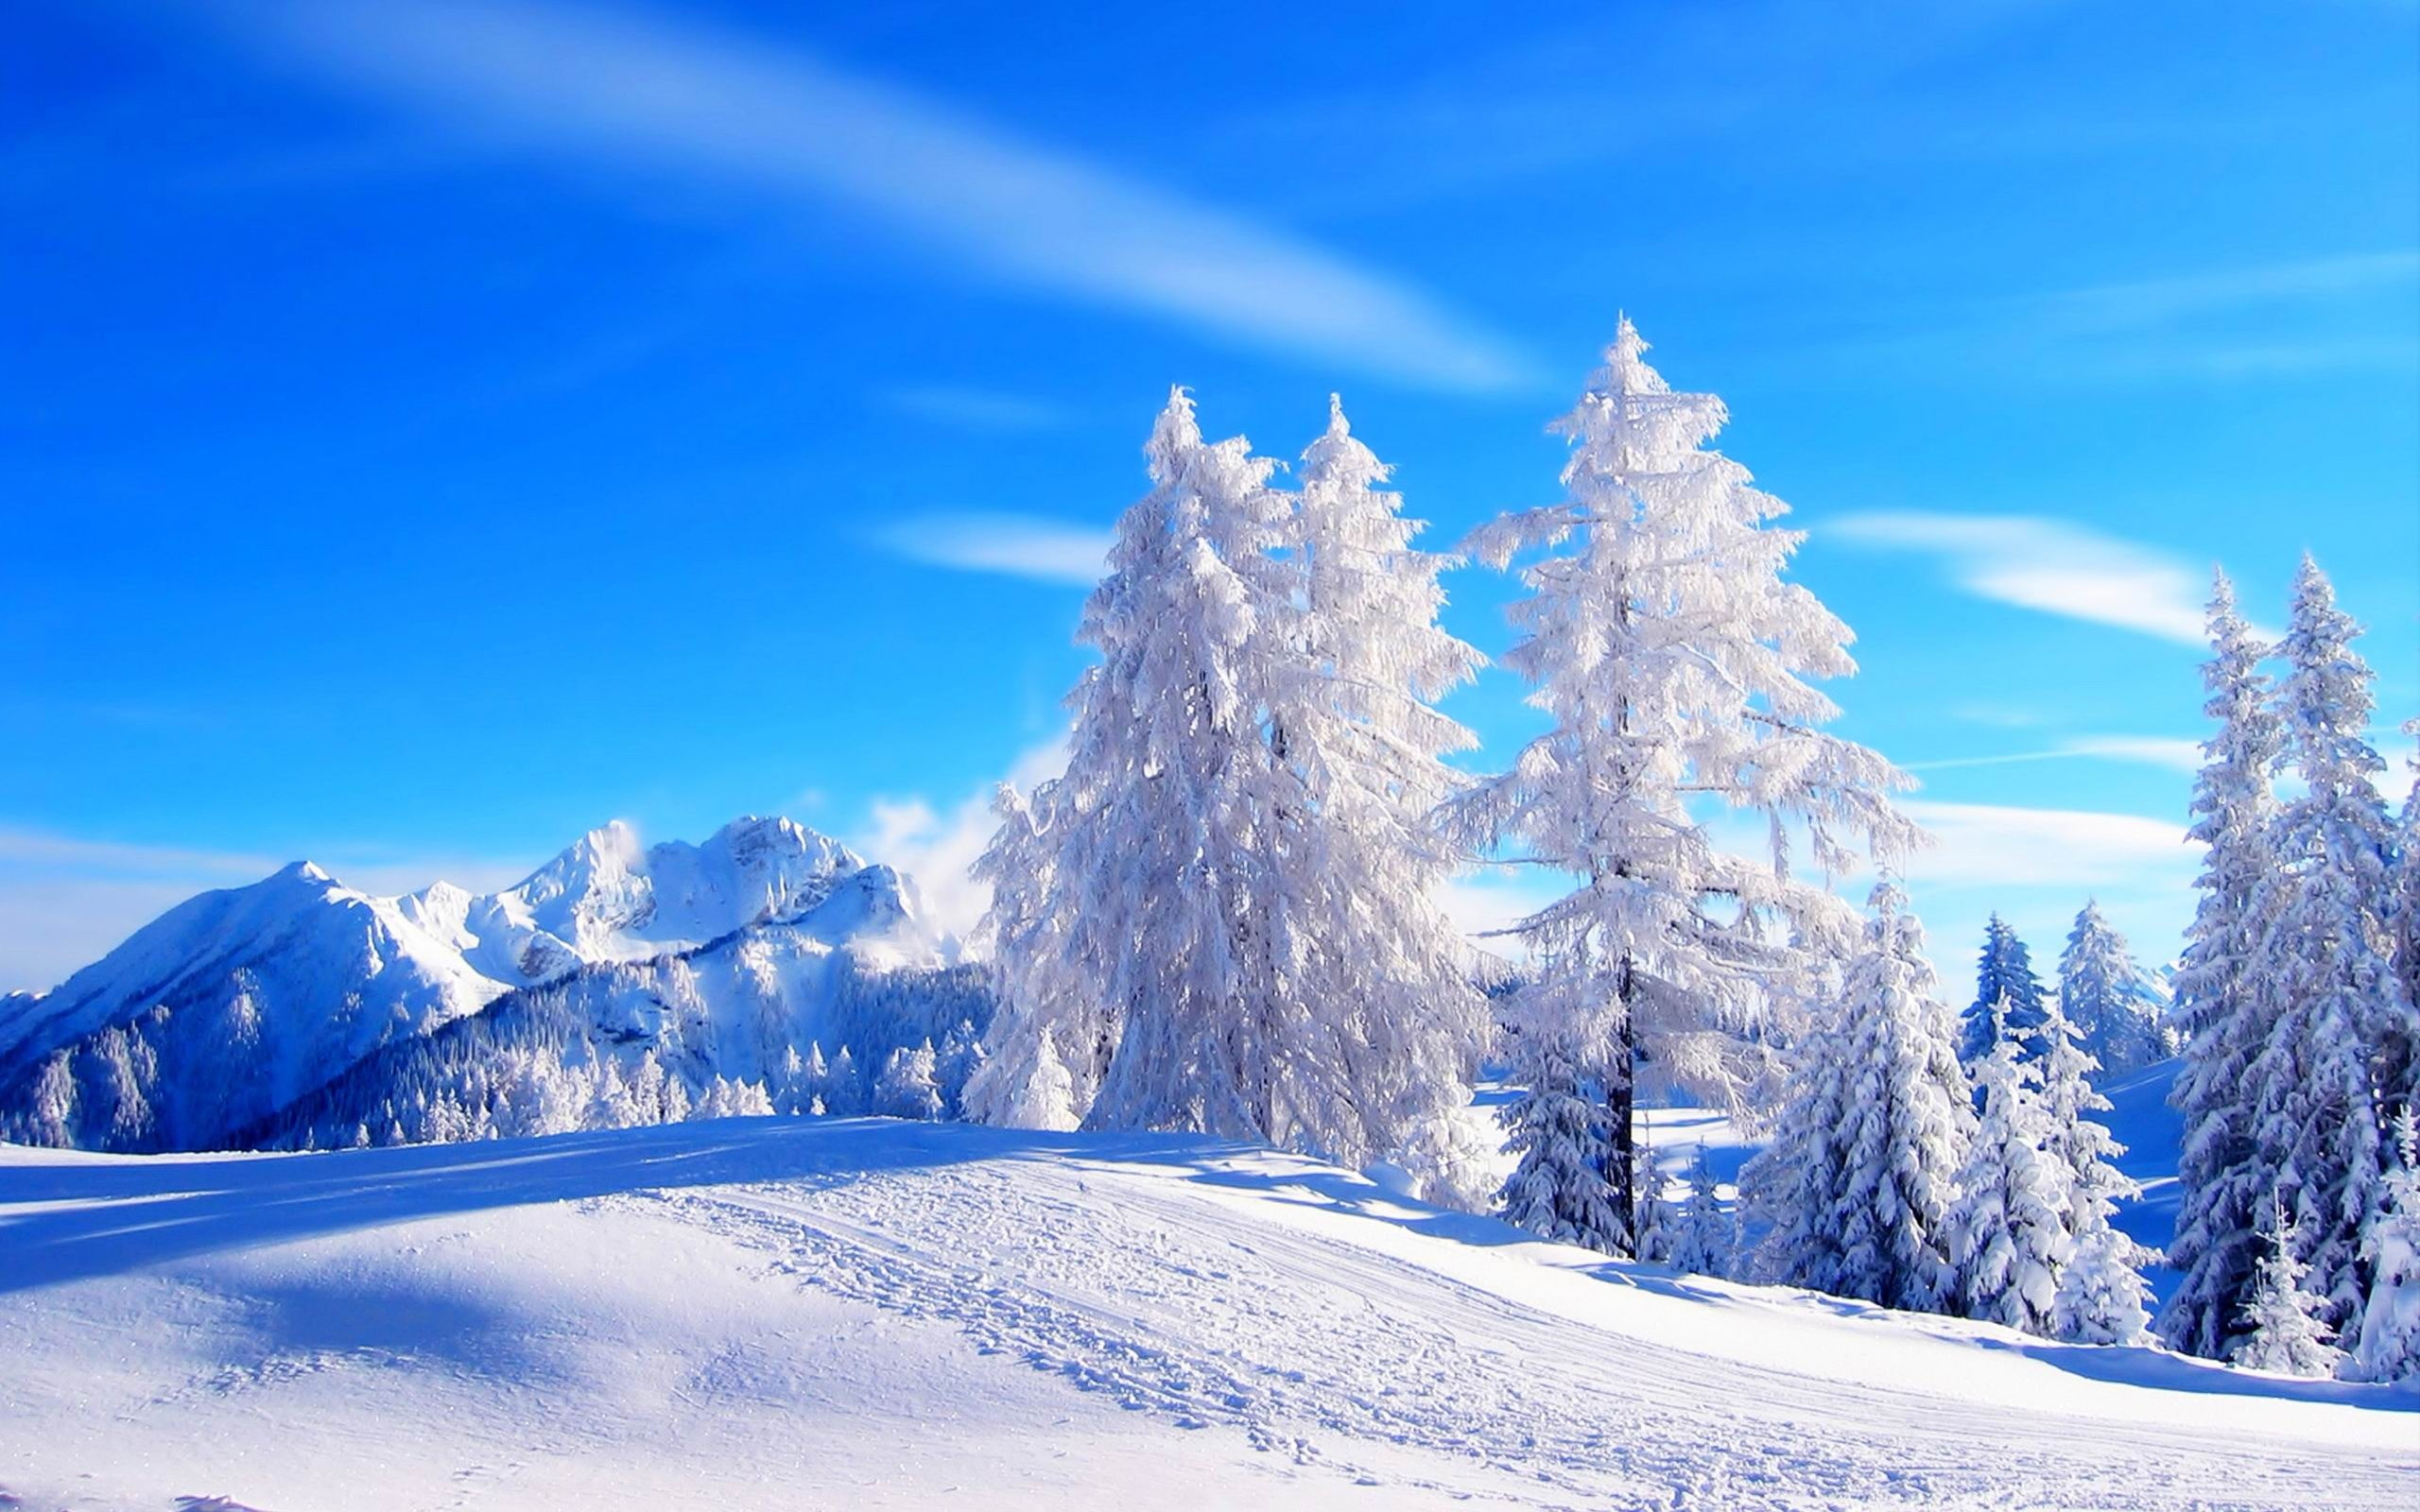 Most beautiful winter landscape HD wallpaper 02, pine trees cover with snow wallpaper